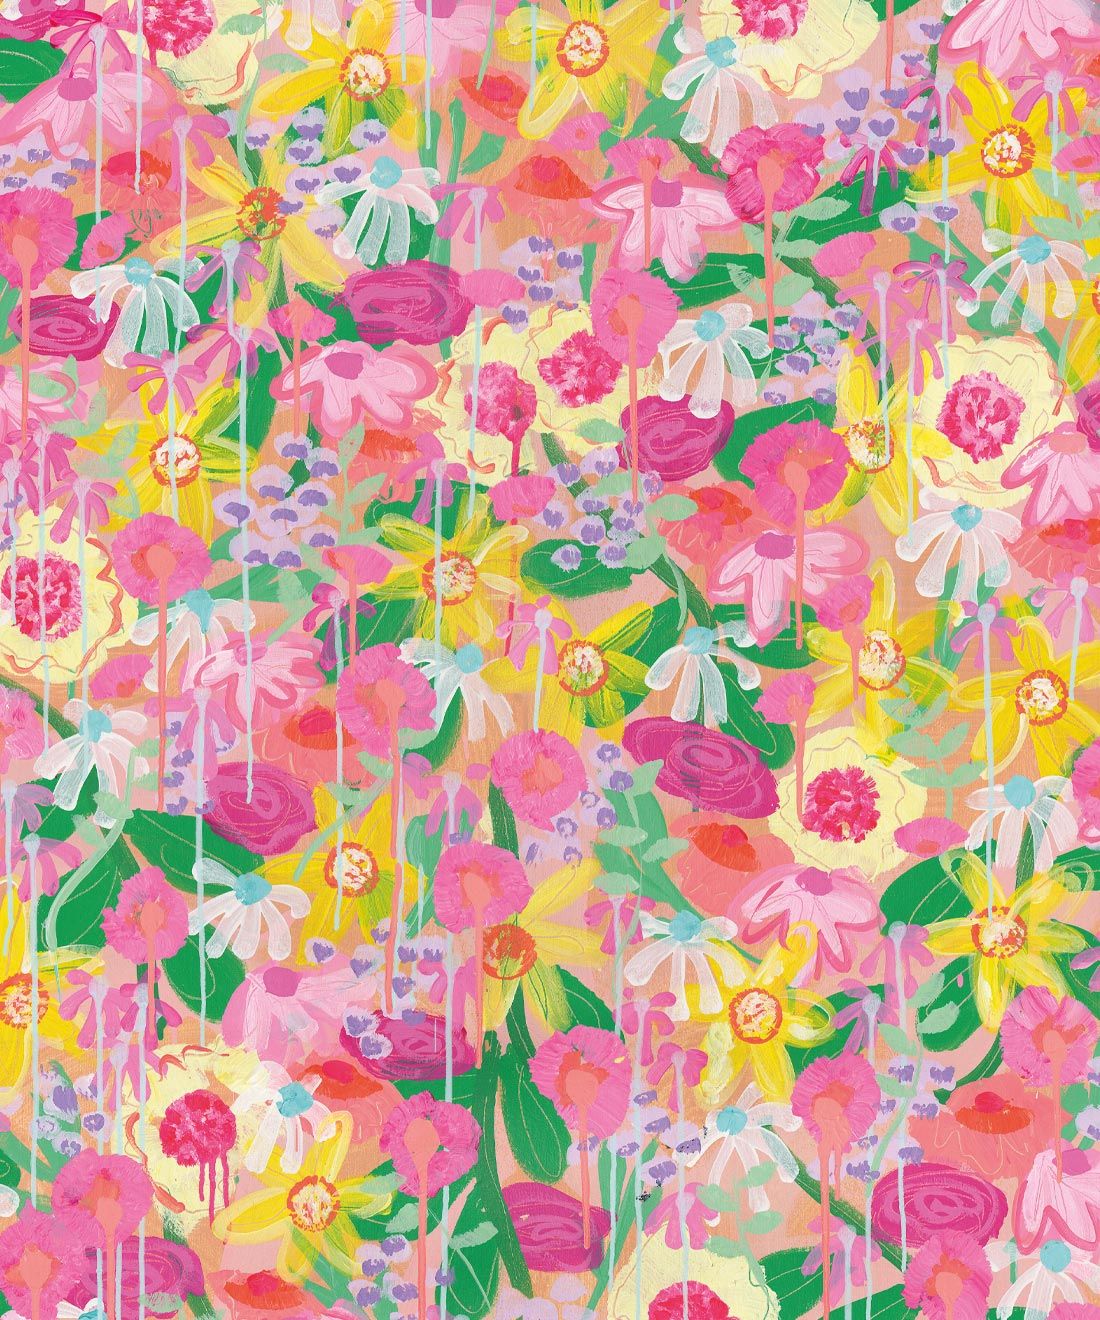 Homestead Wallpaper • Tiff Manuell • Colorful Floral Wallpaper • Swatch